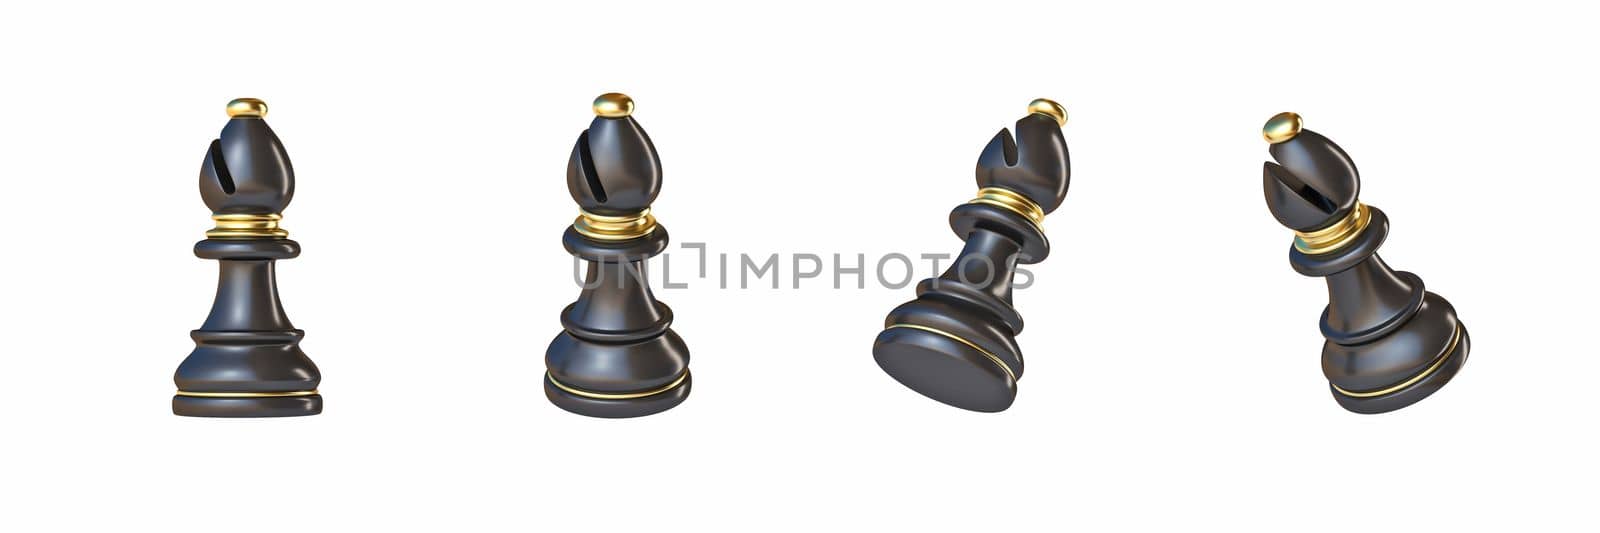 Black chess Bishop in four different angled views 3D rendering illustration isolated on white background